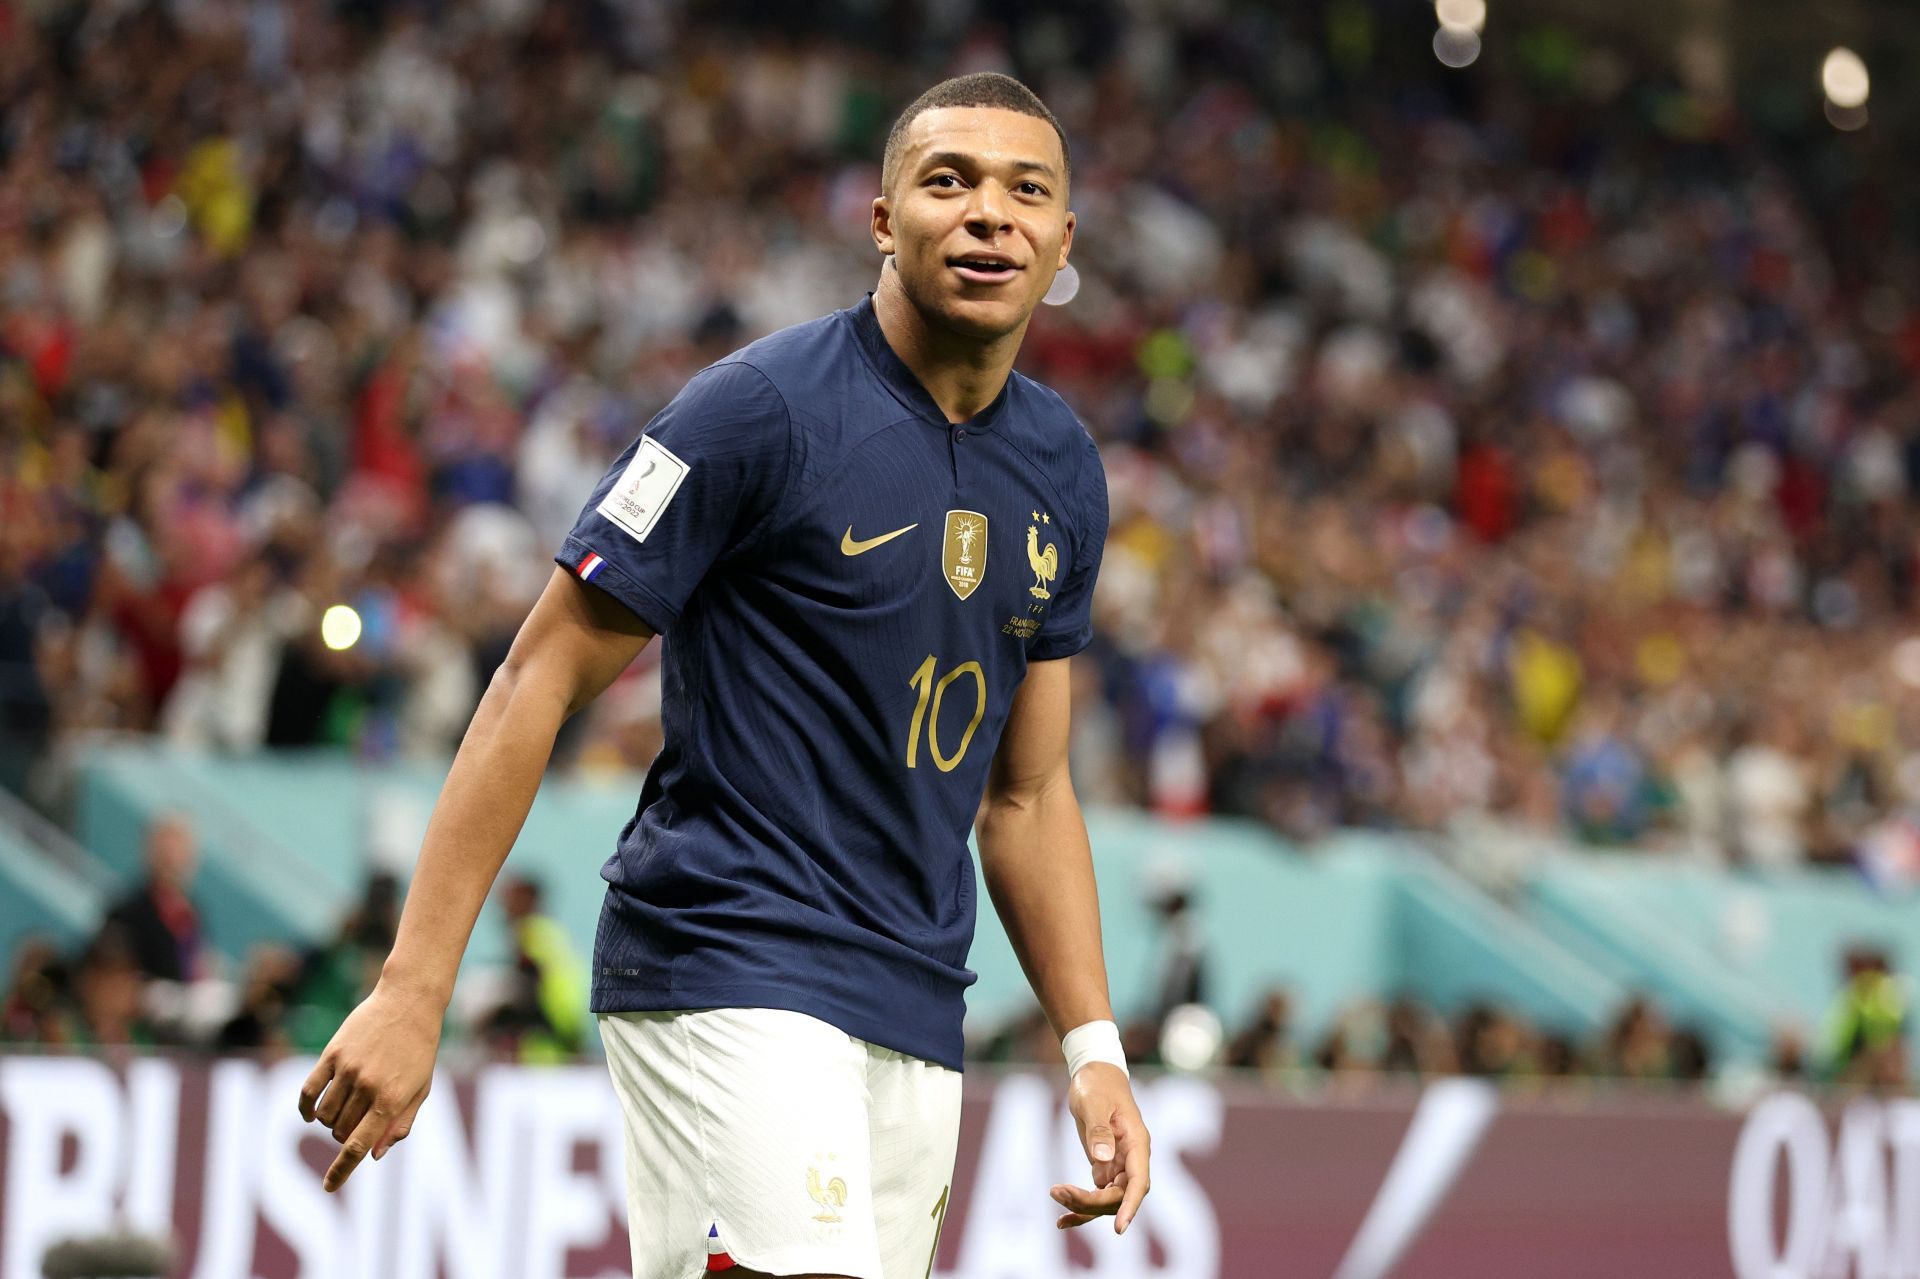 A goal and assist for Mbappe